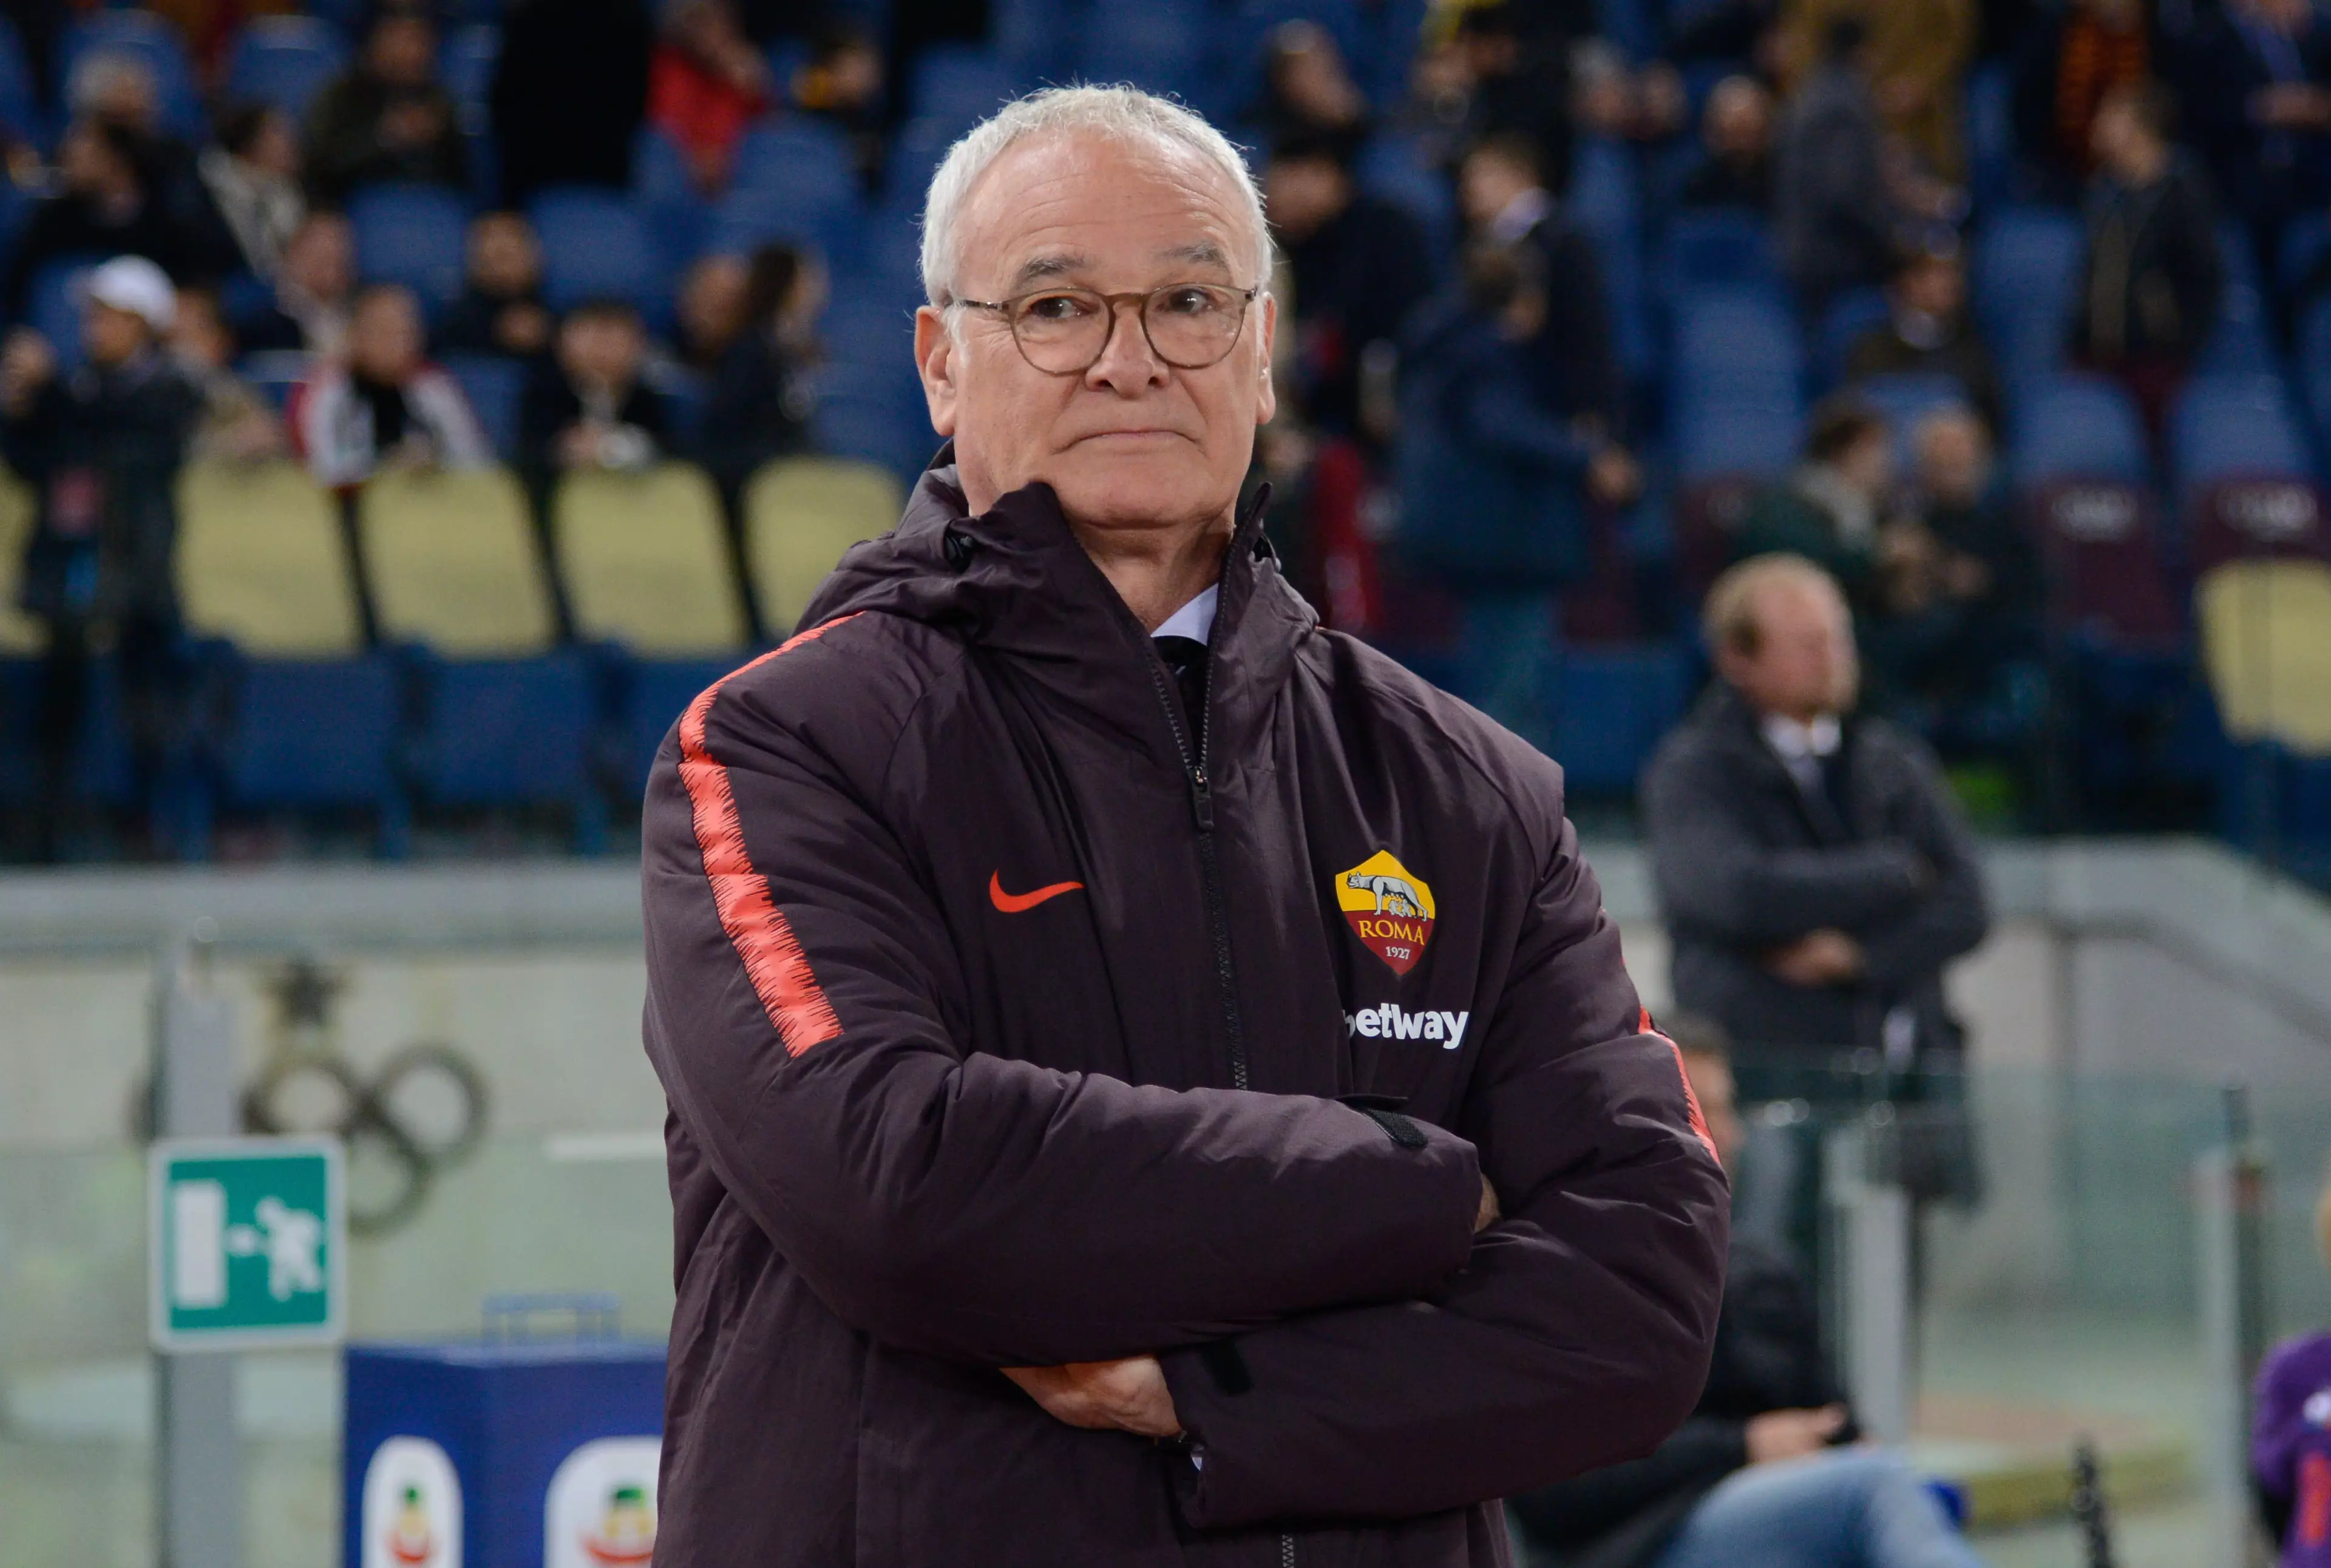 Ranieri is in his second spell with Roma. Image: PA Images